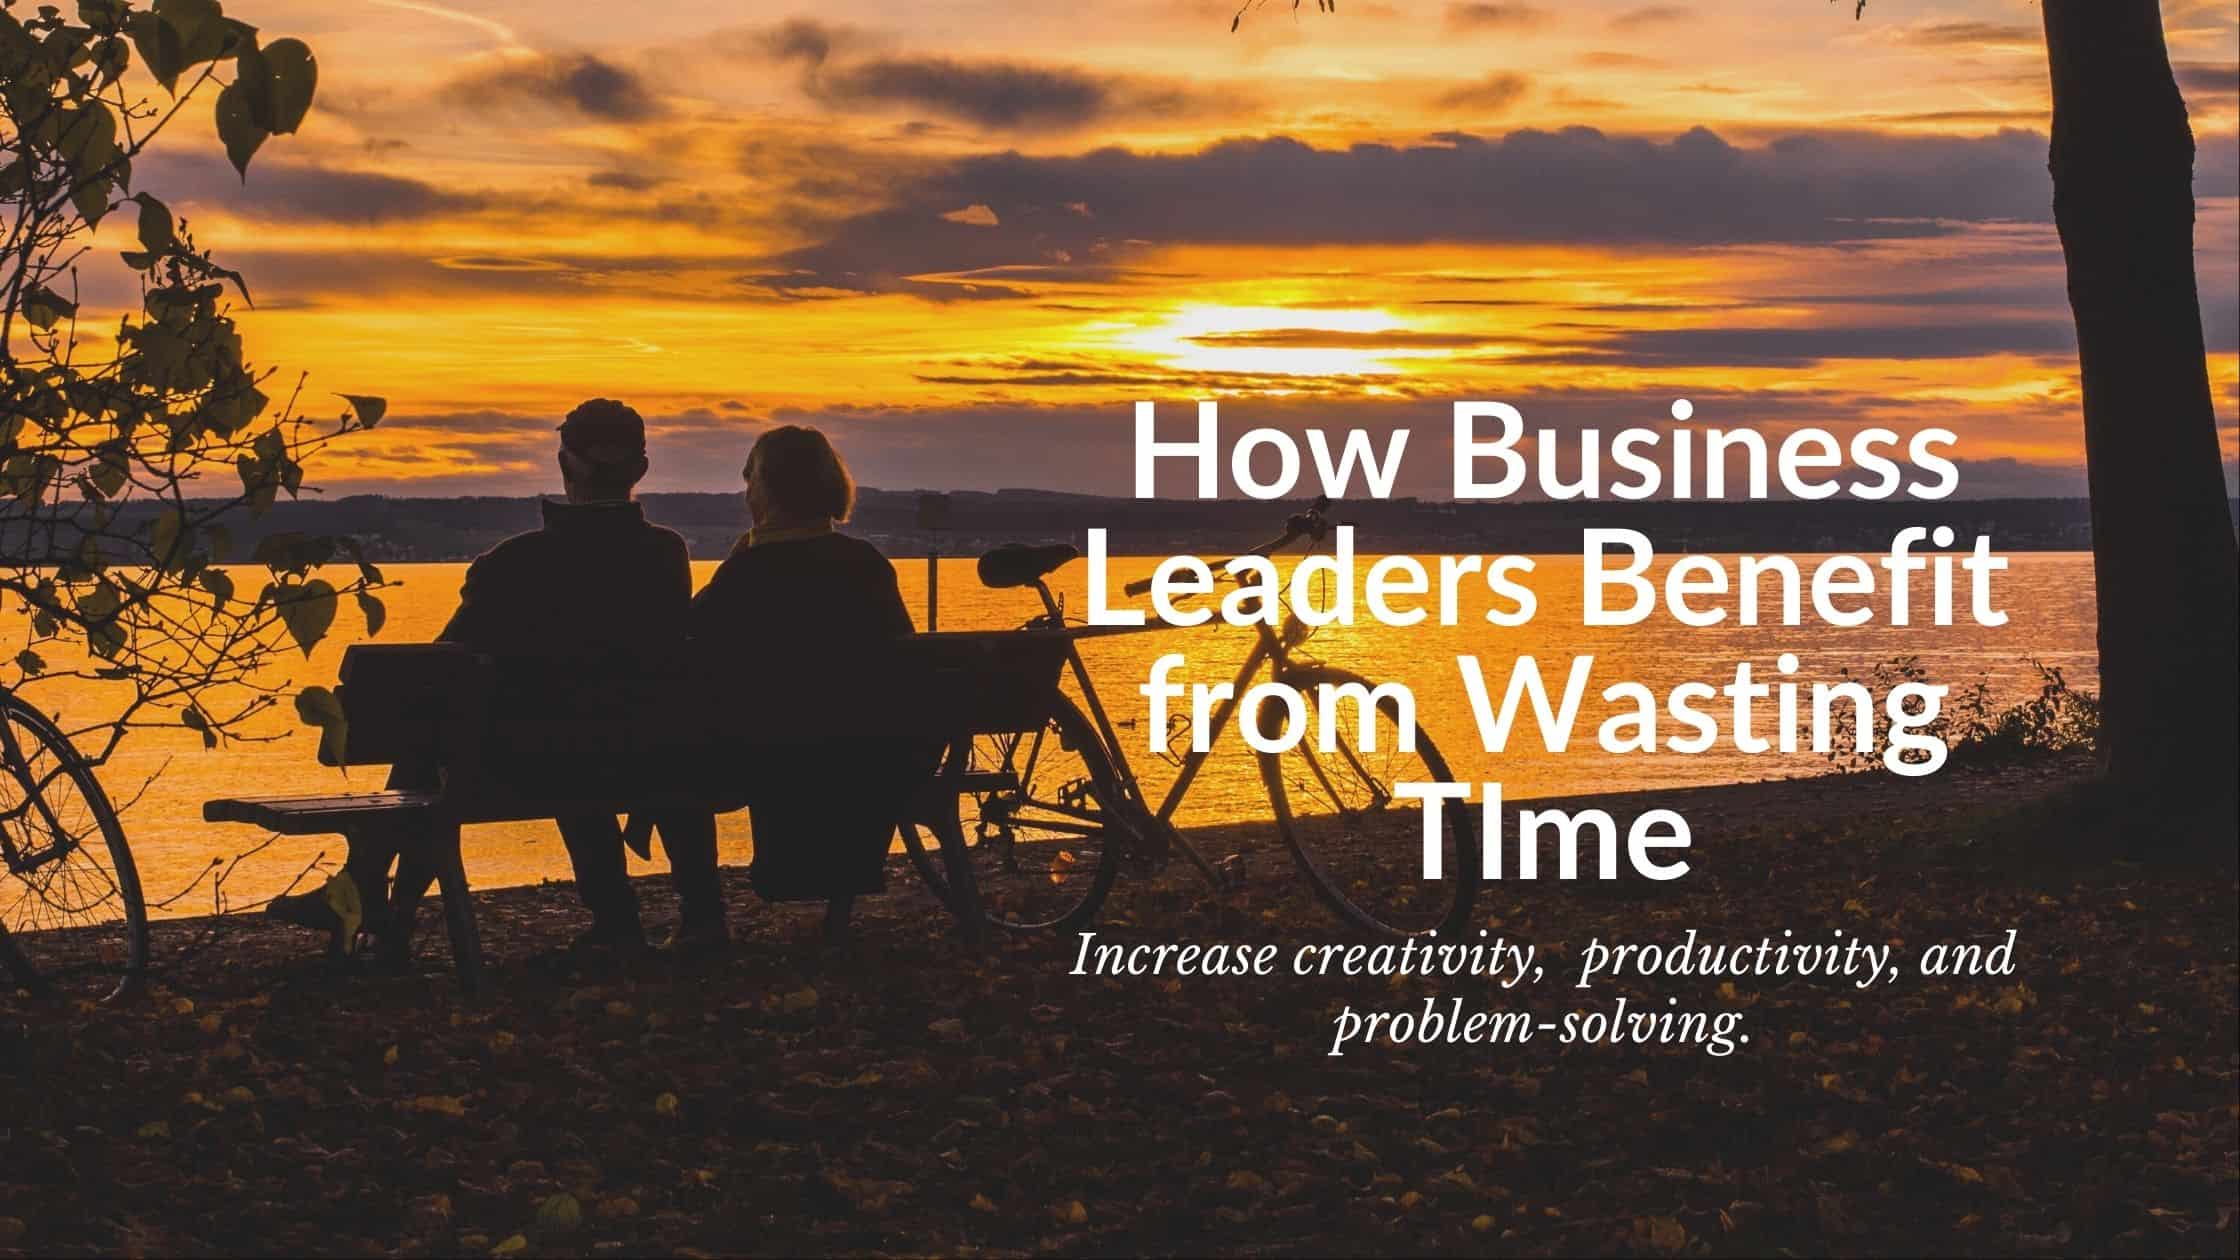 Business leaders benefit from wasting time. Here's why its important and how to do it.how